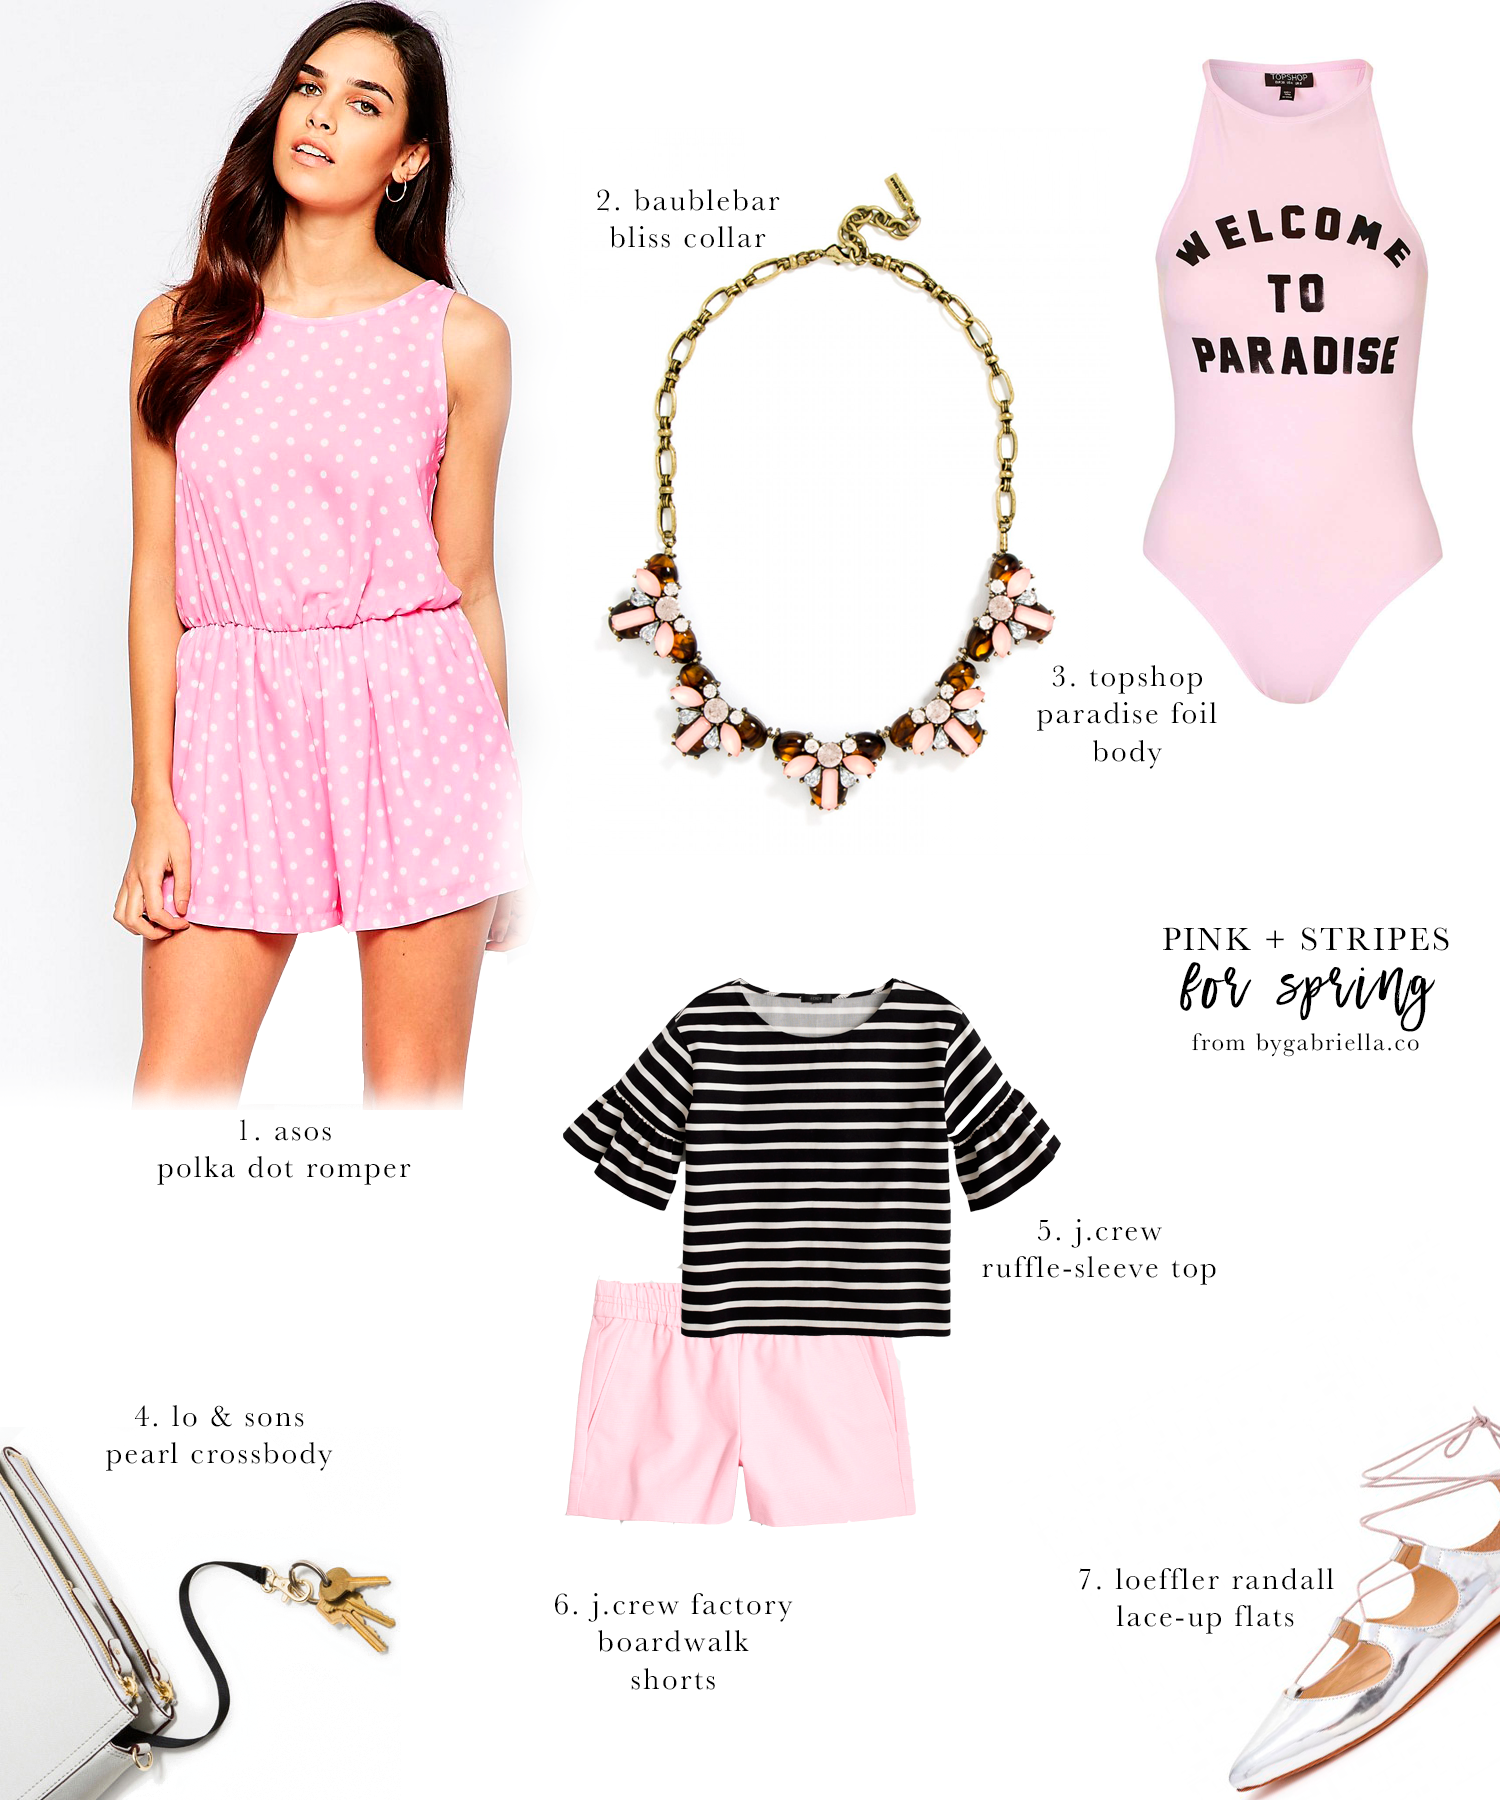 Pink and stripes inspiration for spring / bygabriella.co